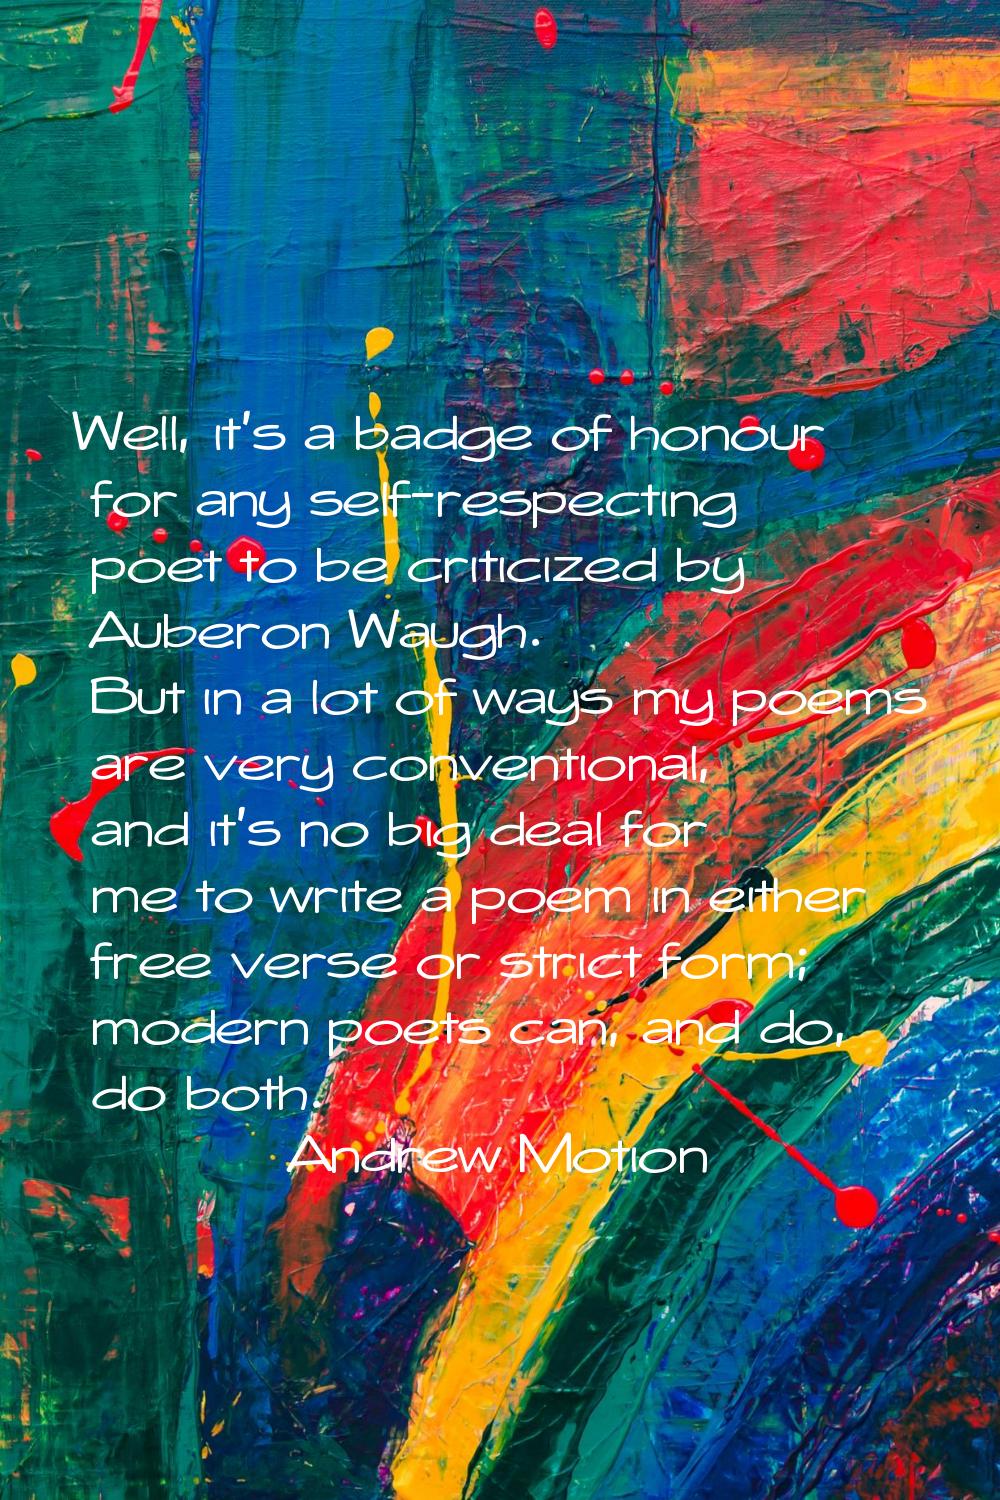 Well, it's a badge of honour for any self-respecting poet to be criticized by Auberon Waugh. But in